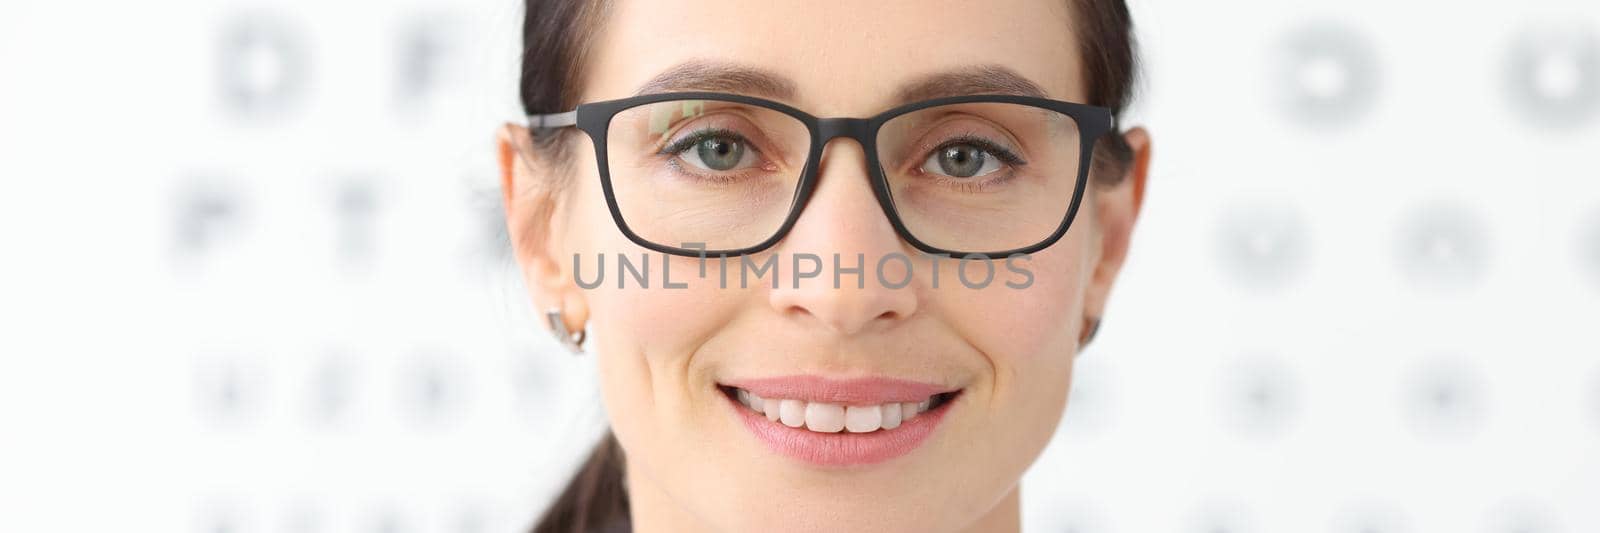 Woman ophthalmologist with glasses standing against background of table for eye test. Laser vision correction concept